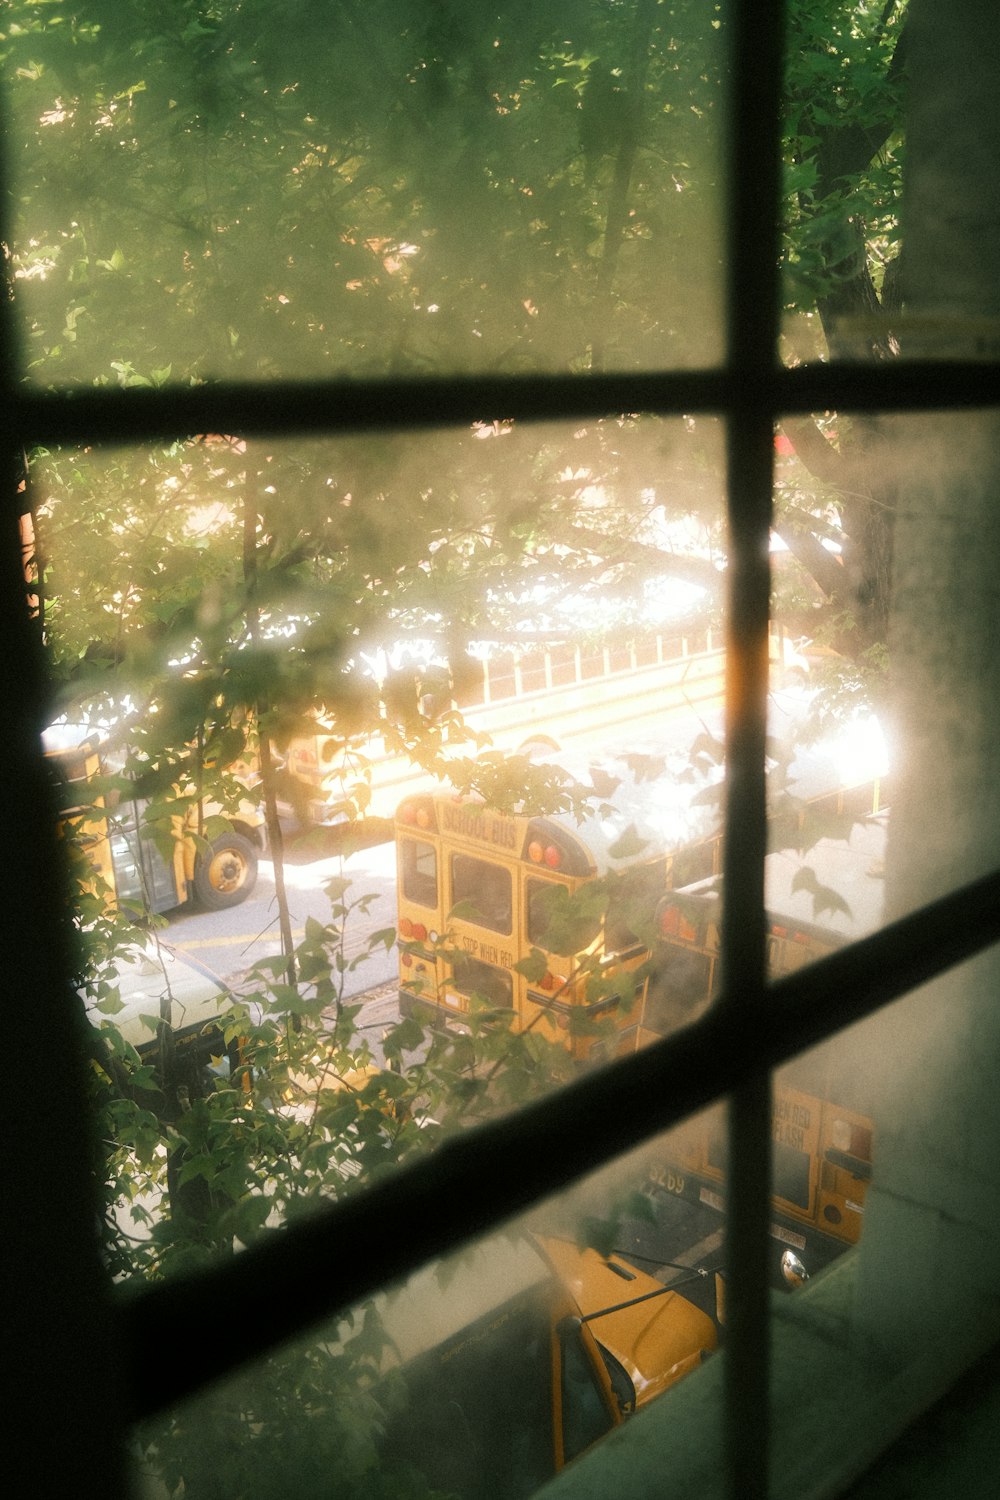 a view of a school bus from a window